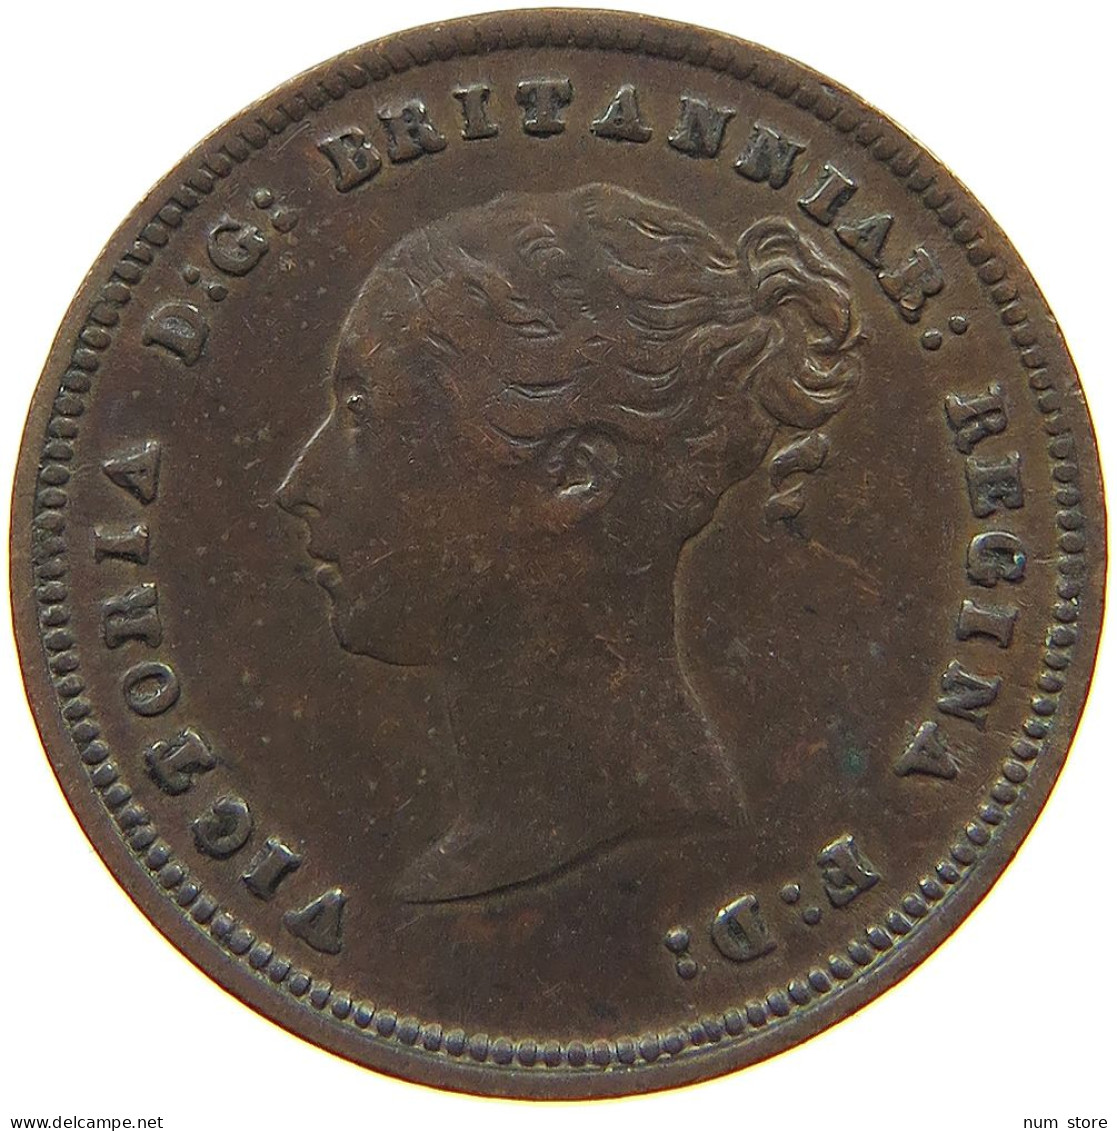 GREAT BRITAIN 1/2 FARTHING 1843 Victoria 1837-1901 #t107 0201 - A. 1/4 - 1/3 - 1/2 Farthing